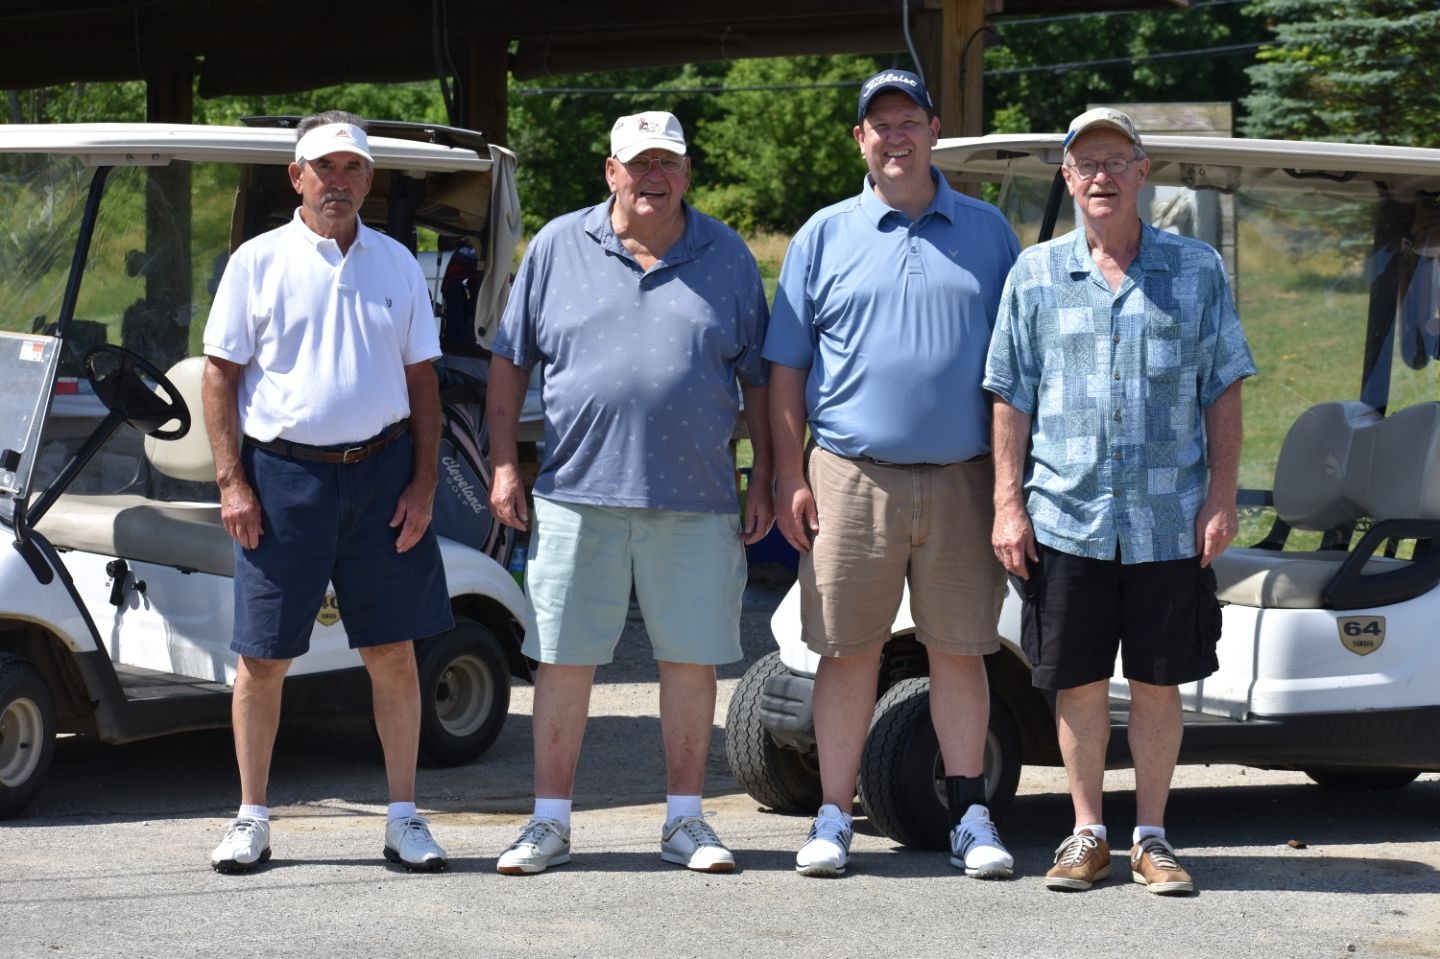 Thank you to Golf Chairman, Jim Stephenson, and Senior Vice Commander, Mike Curtis, for all of their hard work in putting our outing together again. Thank you to all of our teams for coming out to play and to our hole sponsors for their support! We appreciate all the hard work of our volunteers for the day. Thank you to Knoll Run Golf Course for their exceptional services and use of the course. We had a GREAT day!